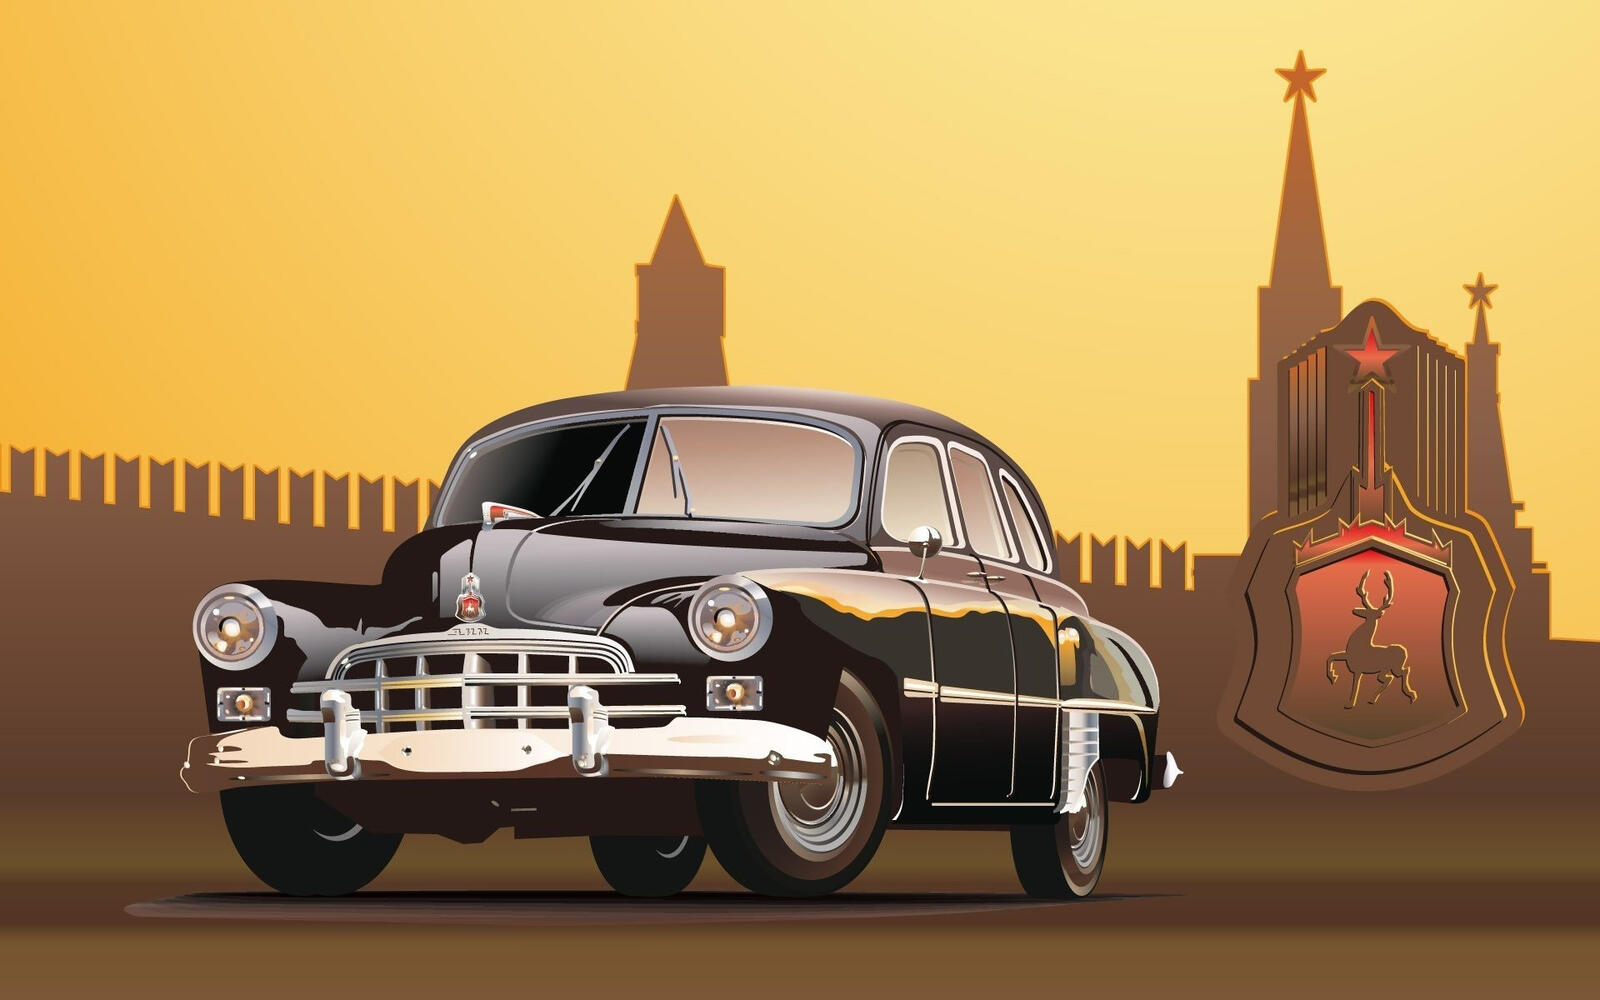 Wallpapers machine limousine cars on the desktop